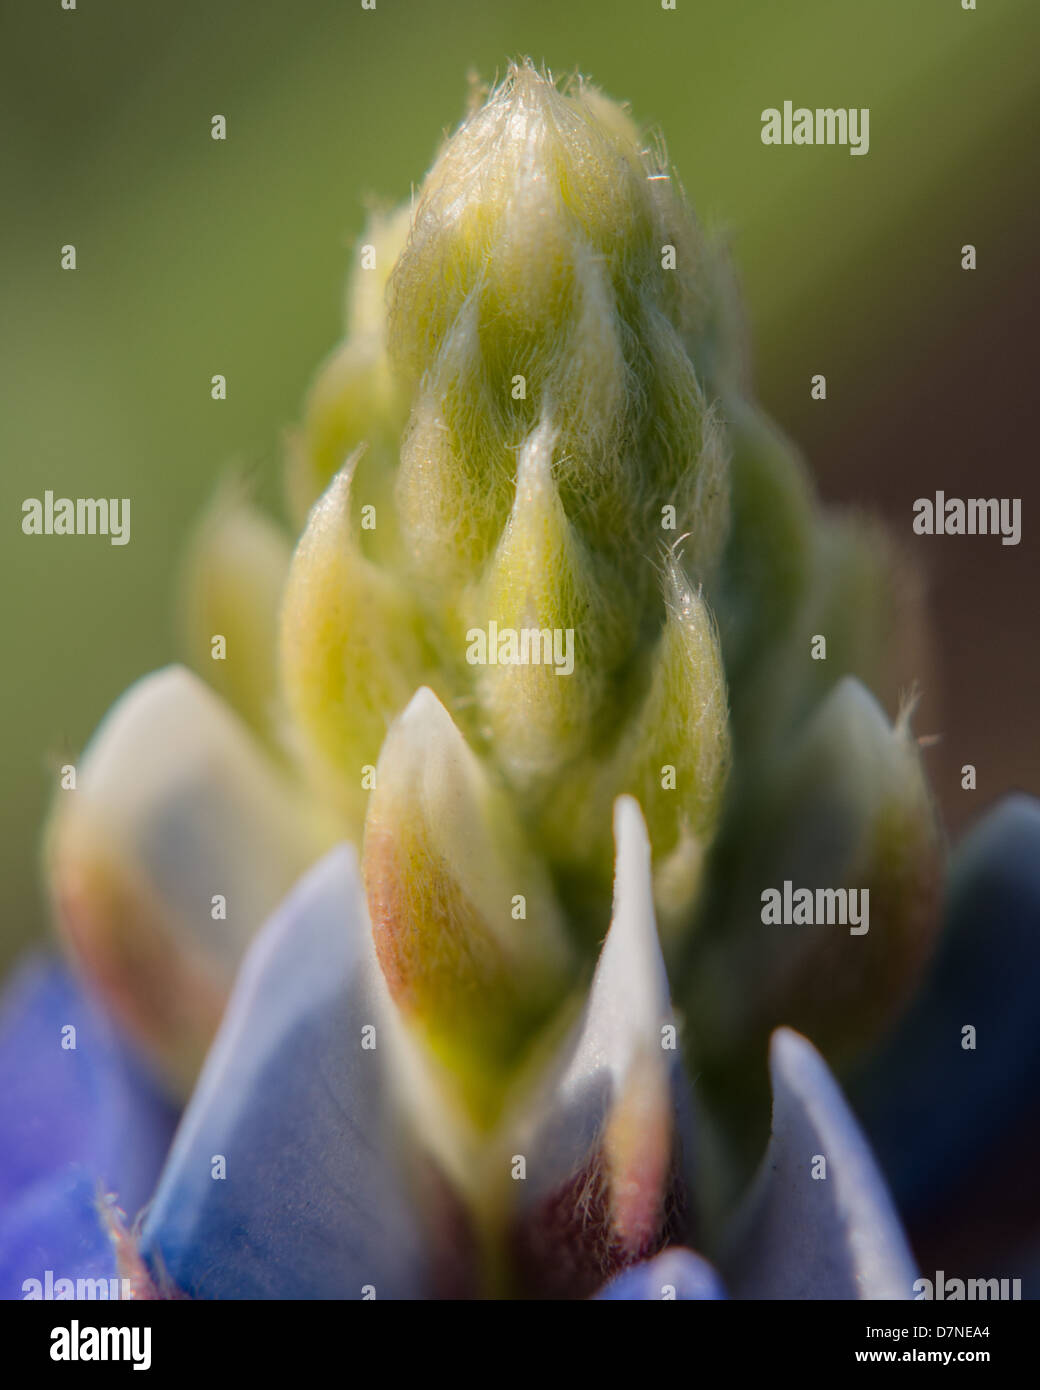 The crown of a Texas bluebonnet wildflower Stock Photo